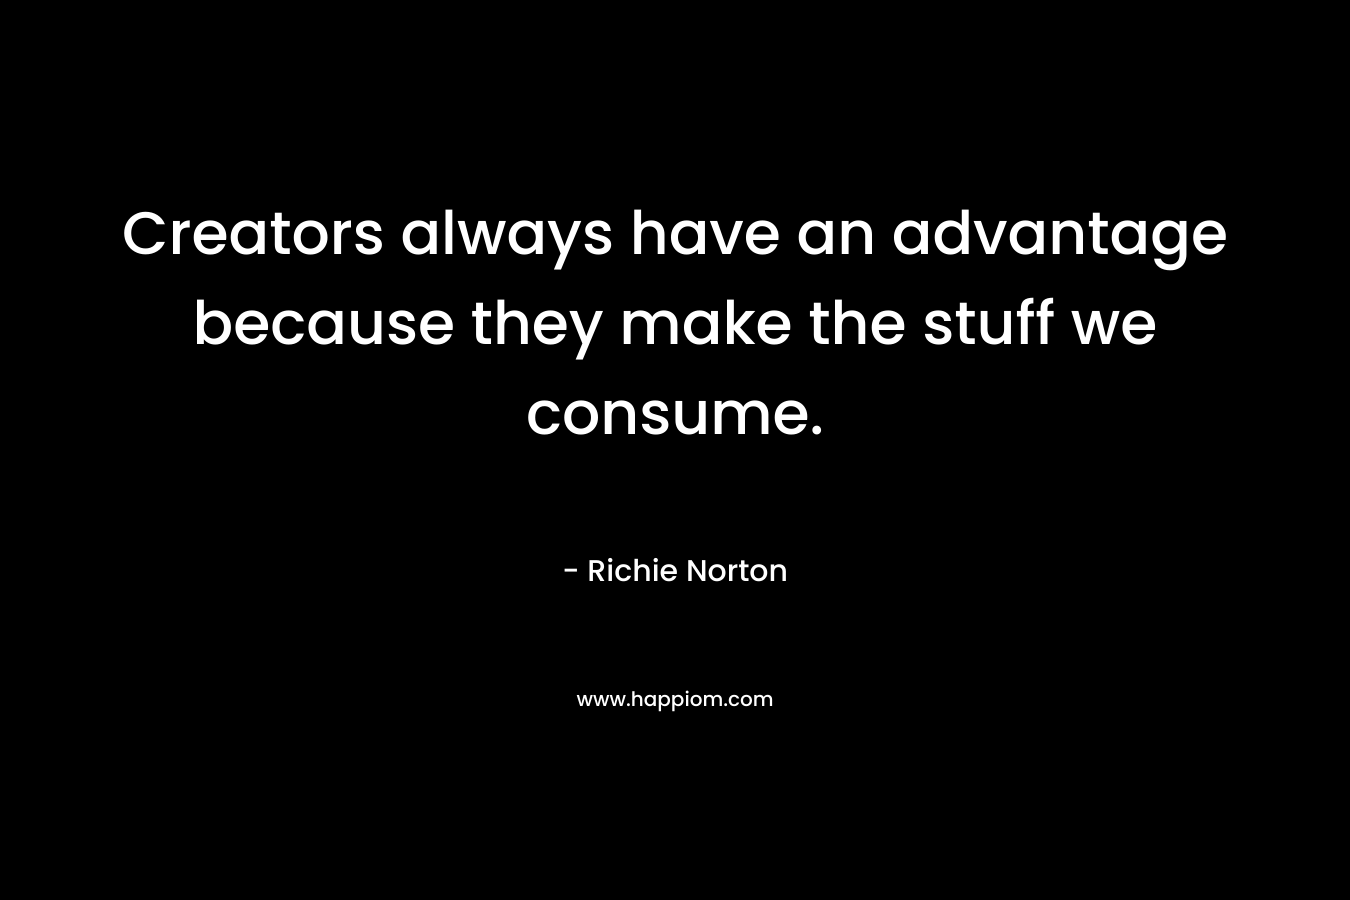 Creators always have an advantage because they make the stuff we consume. – Richie Norton